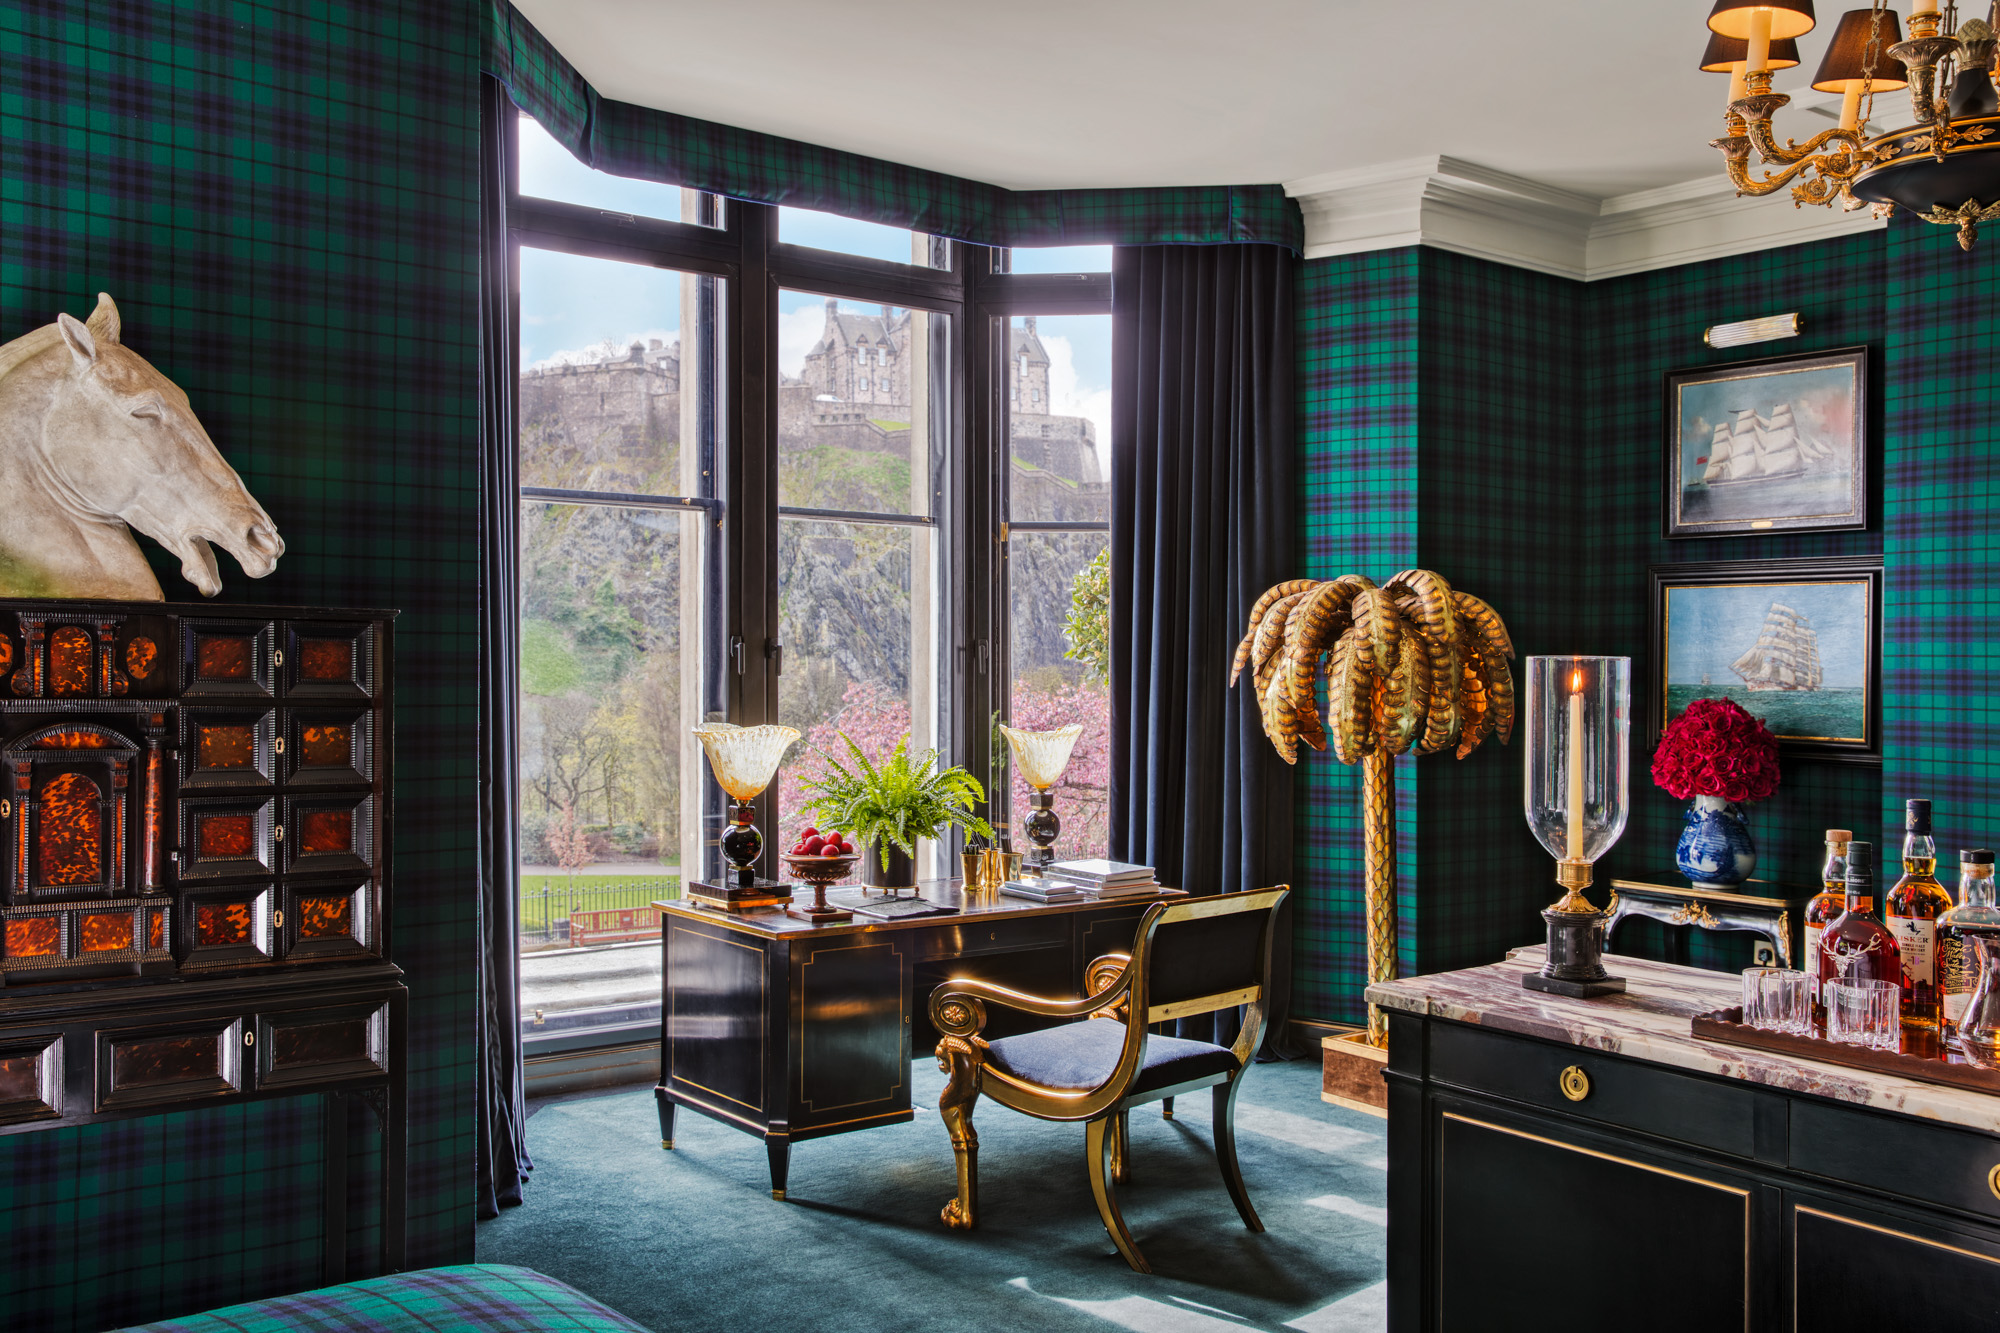 This Edinburgh Boutique Hotel Perfectly Captures Scotland’s Gothic Chic Aesthetic